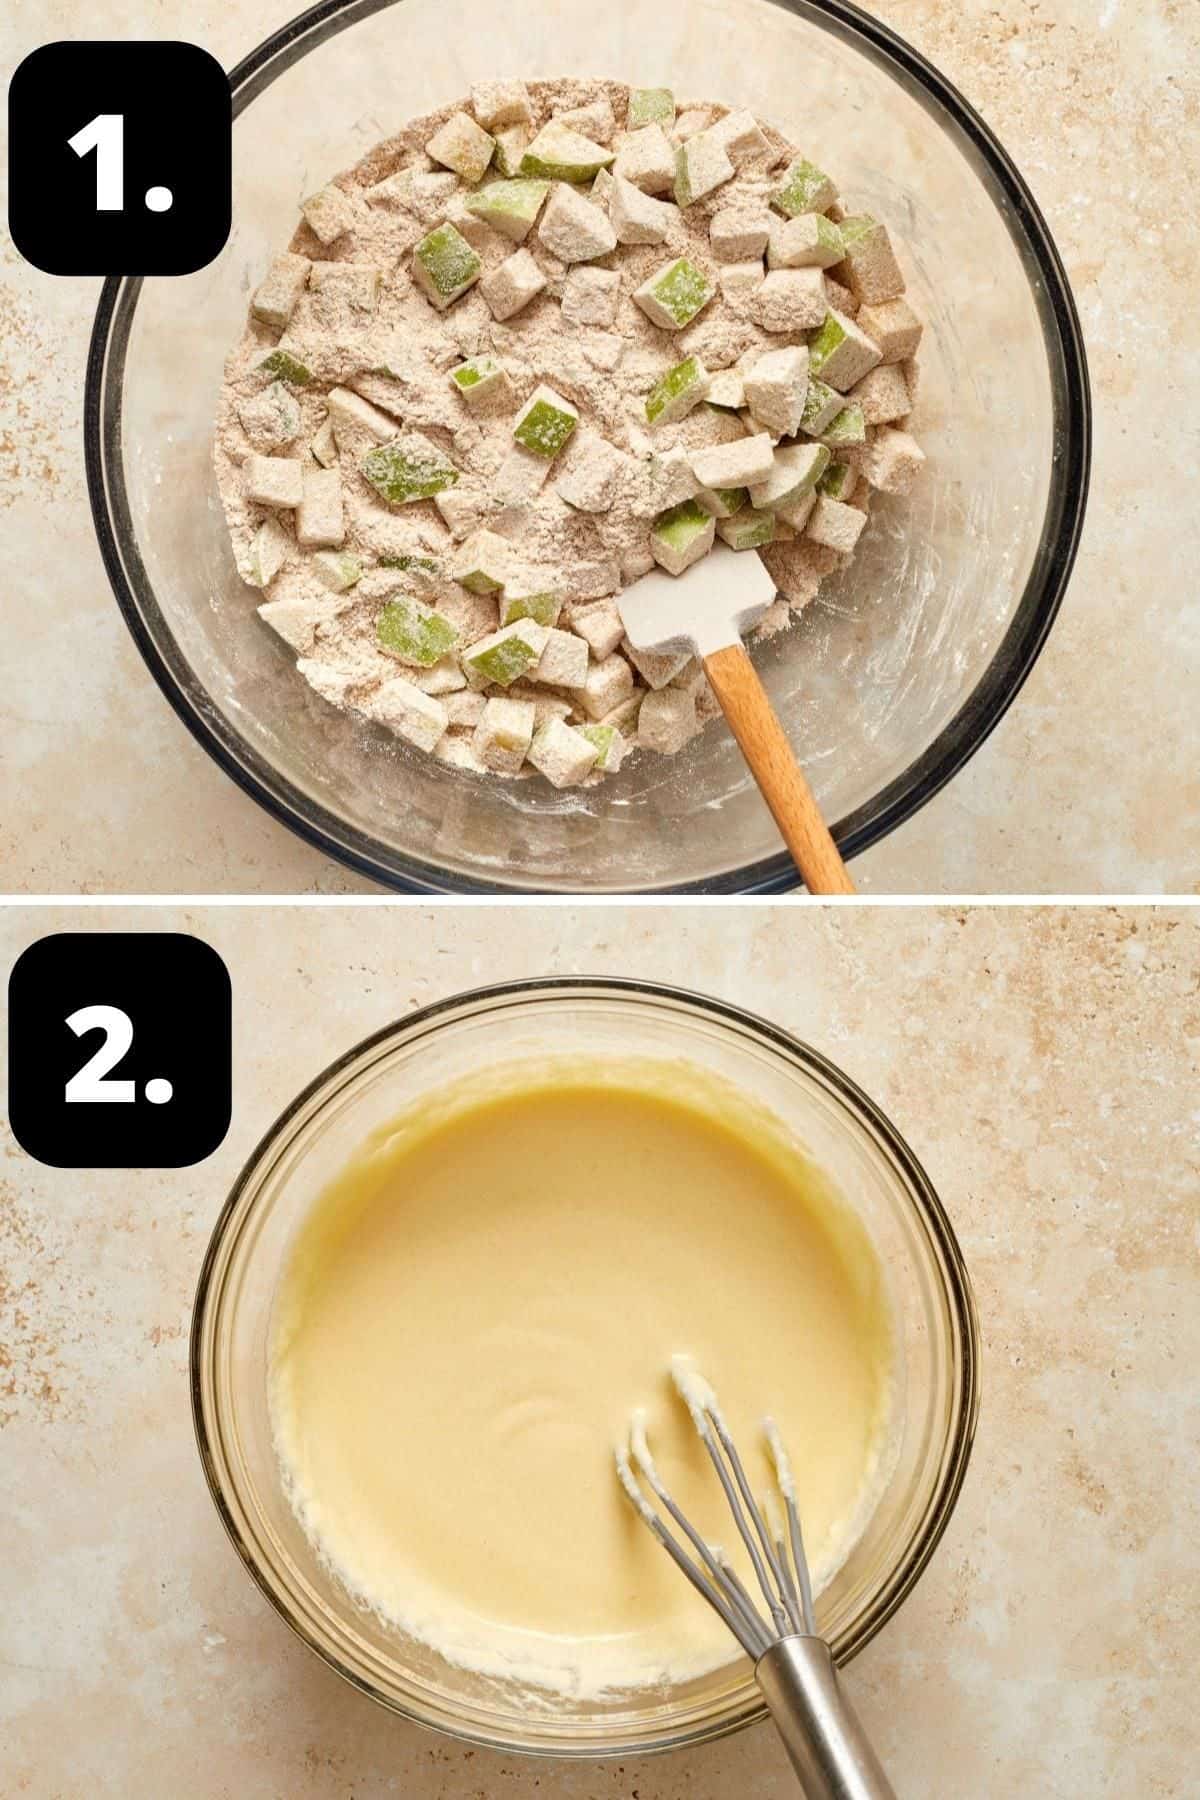 Steps 1-2 of preparing this recipe: dry ingredients and apple in a glass bowl and the wet ingredients in another bowl.